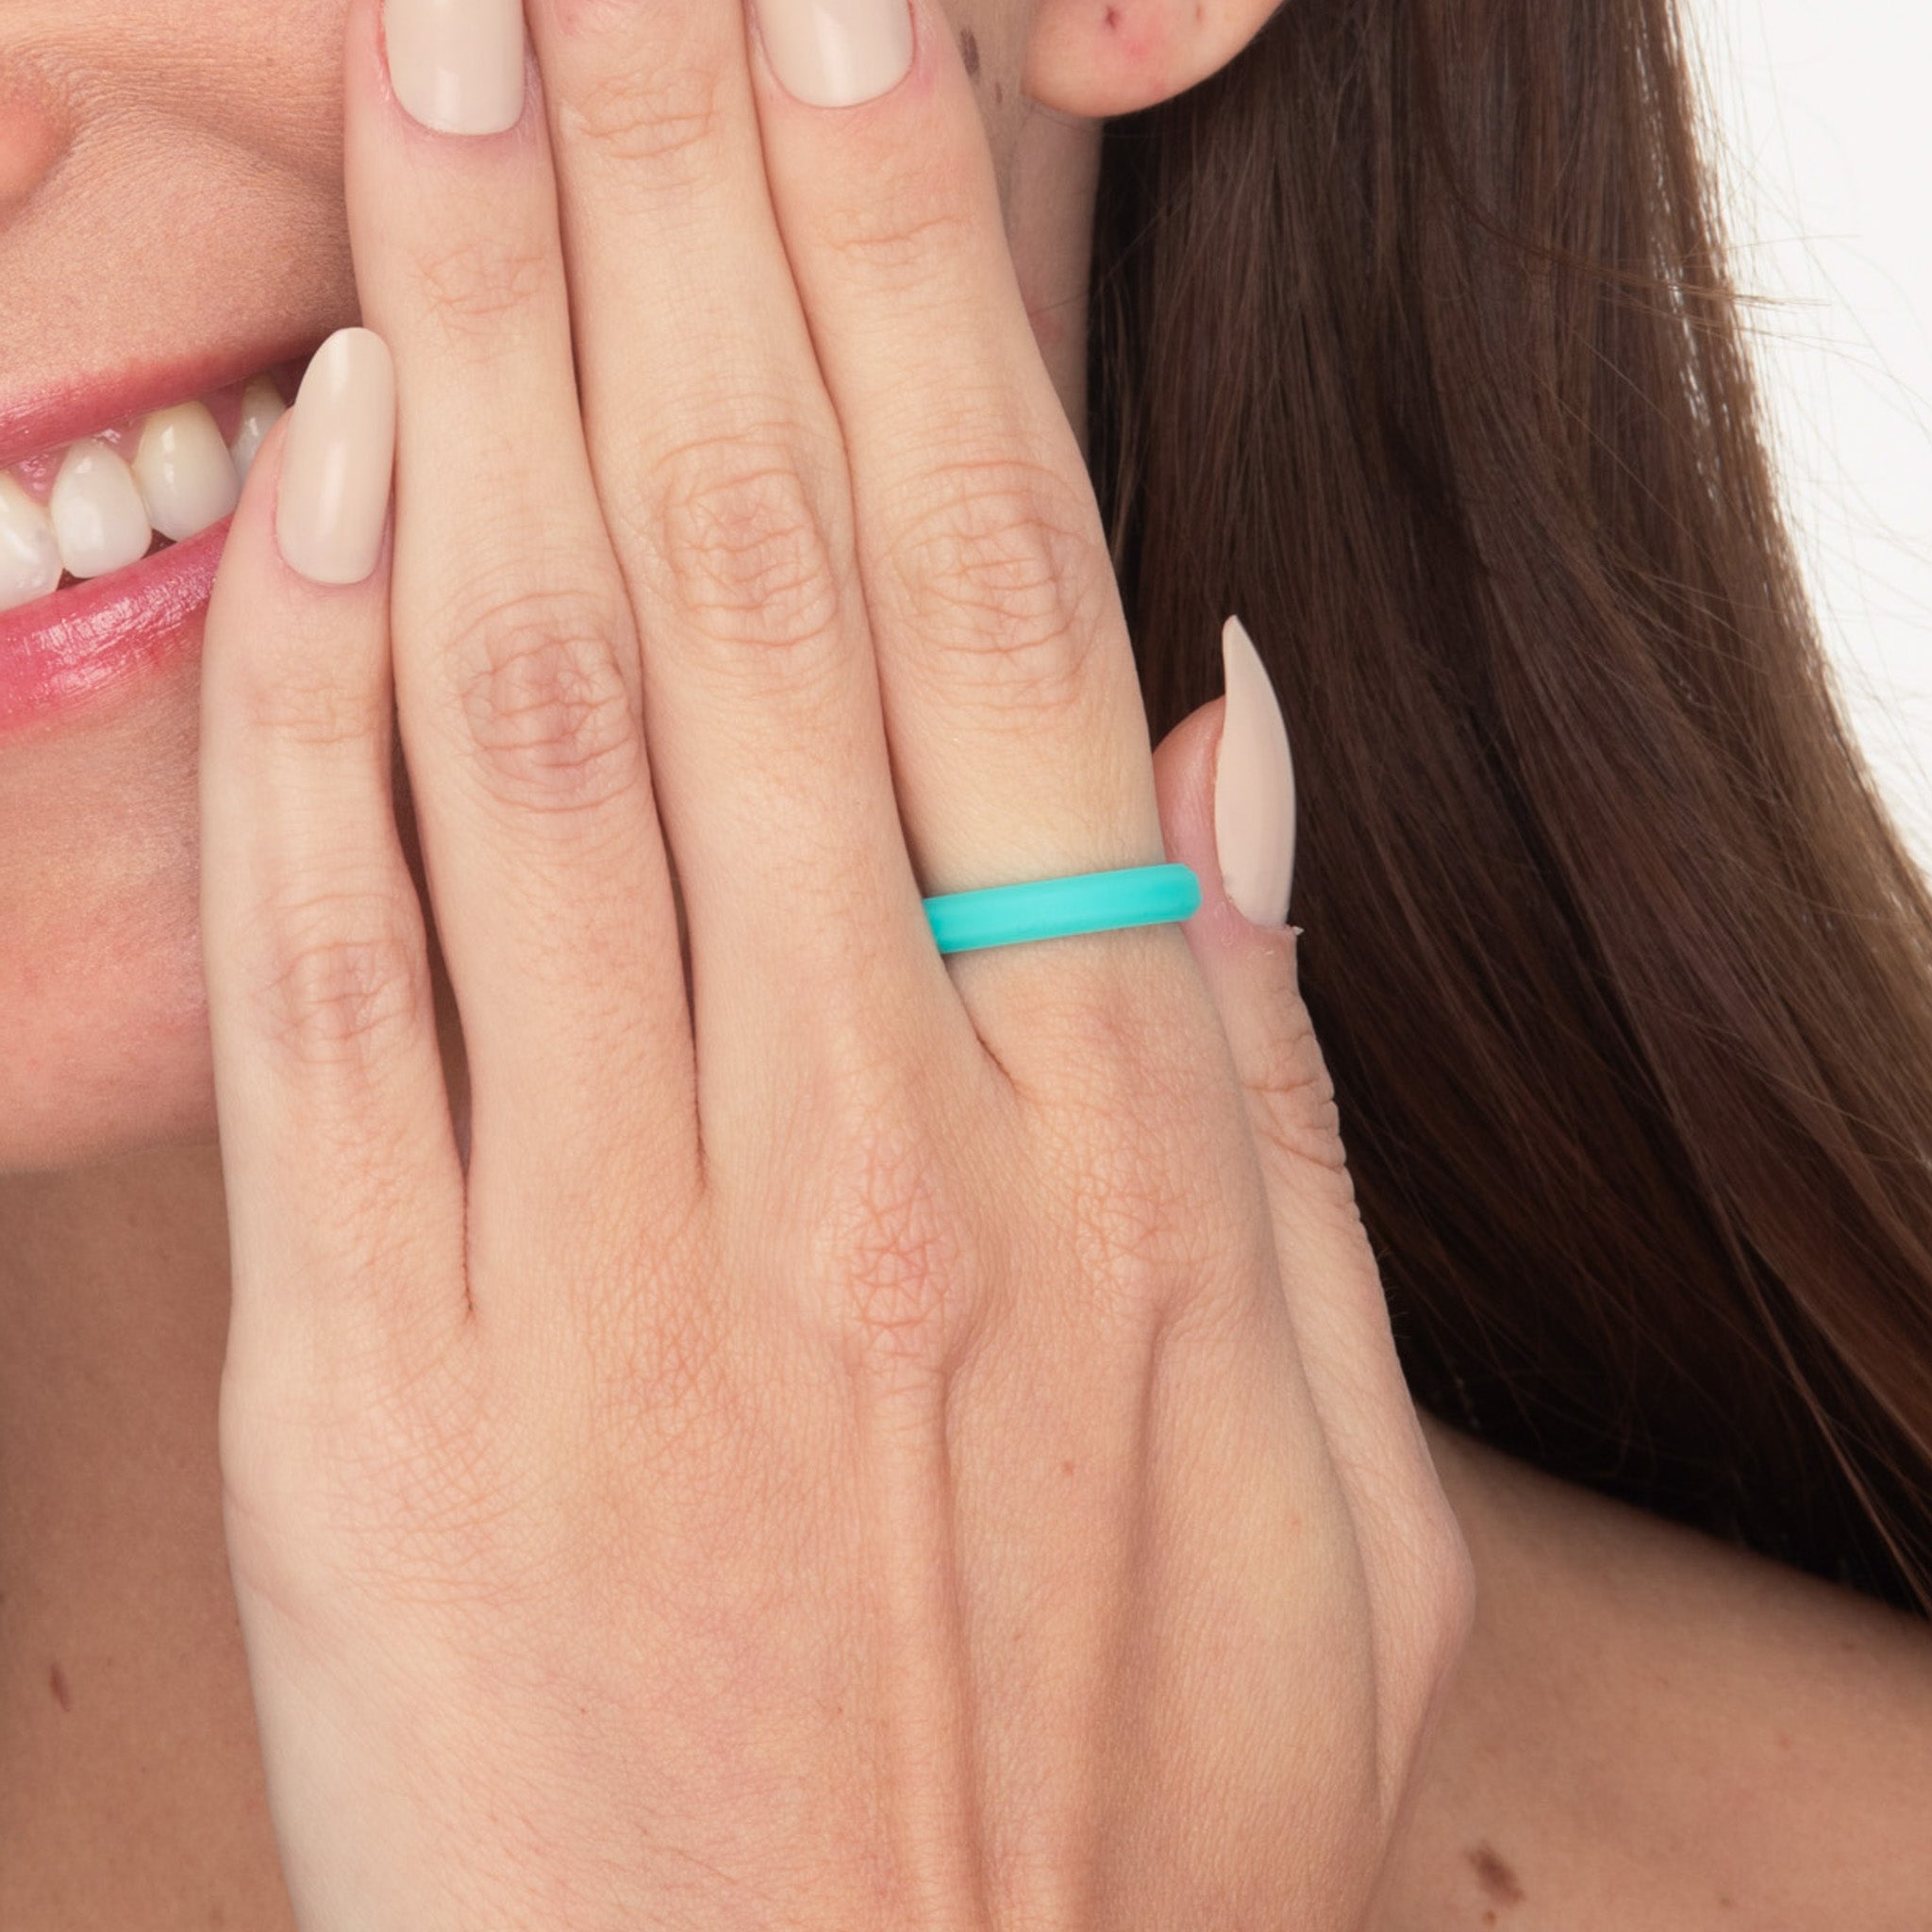 The Bluebell - Silicone Ring